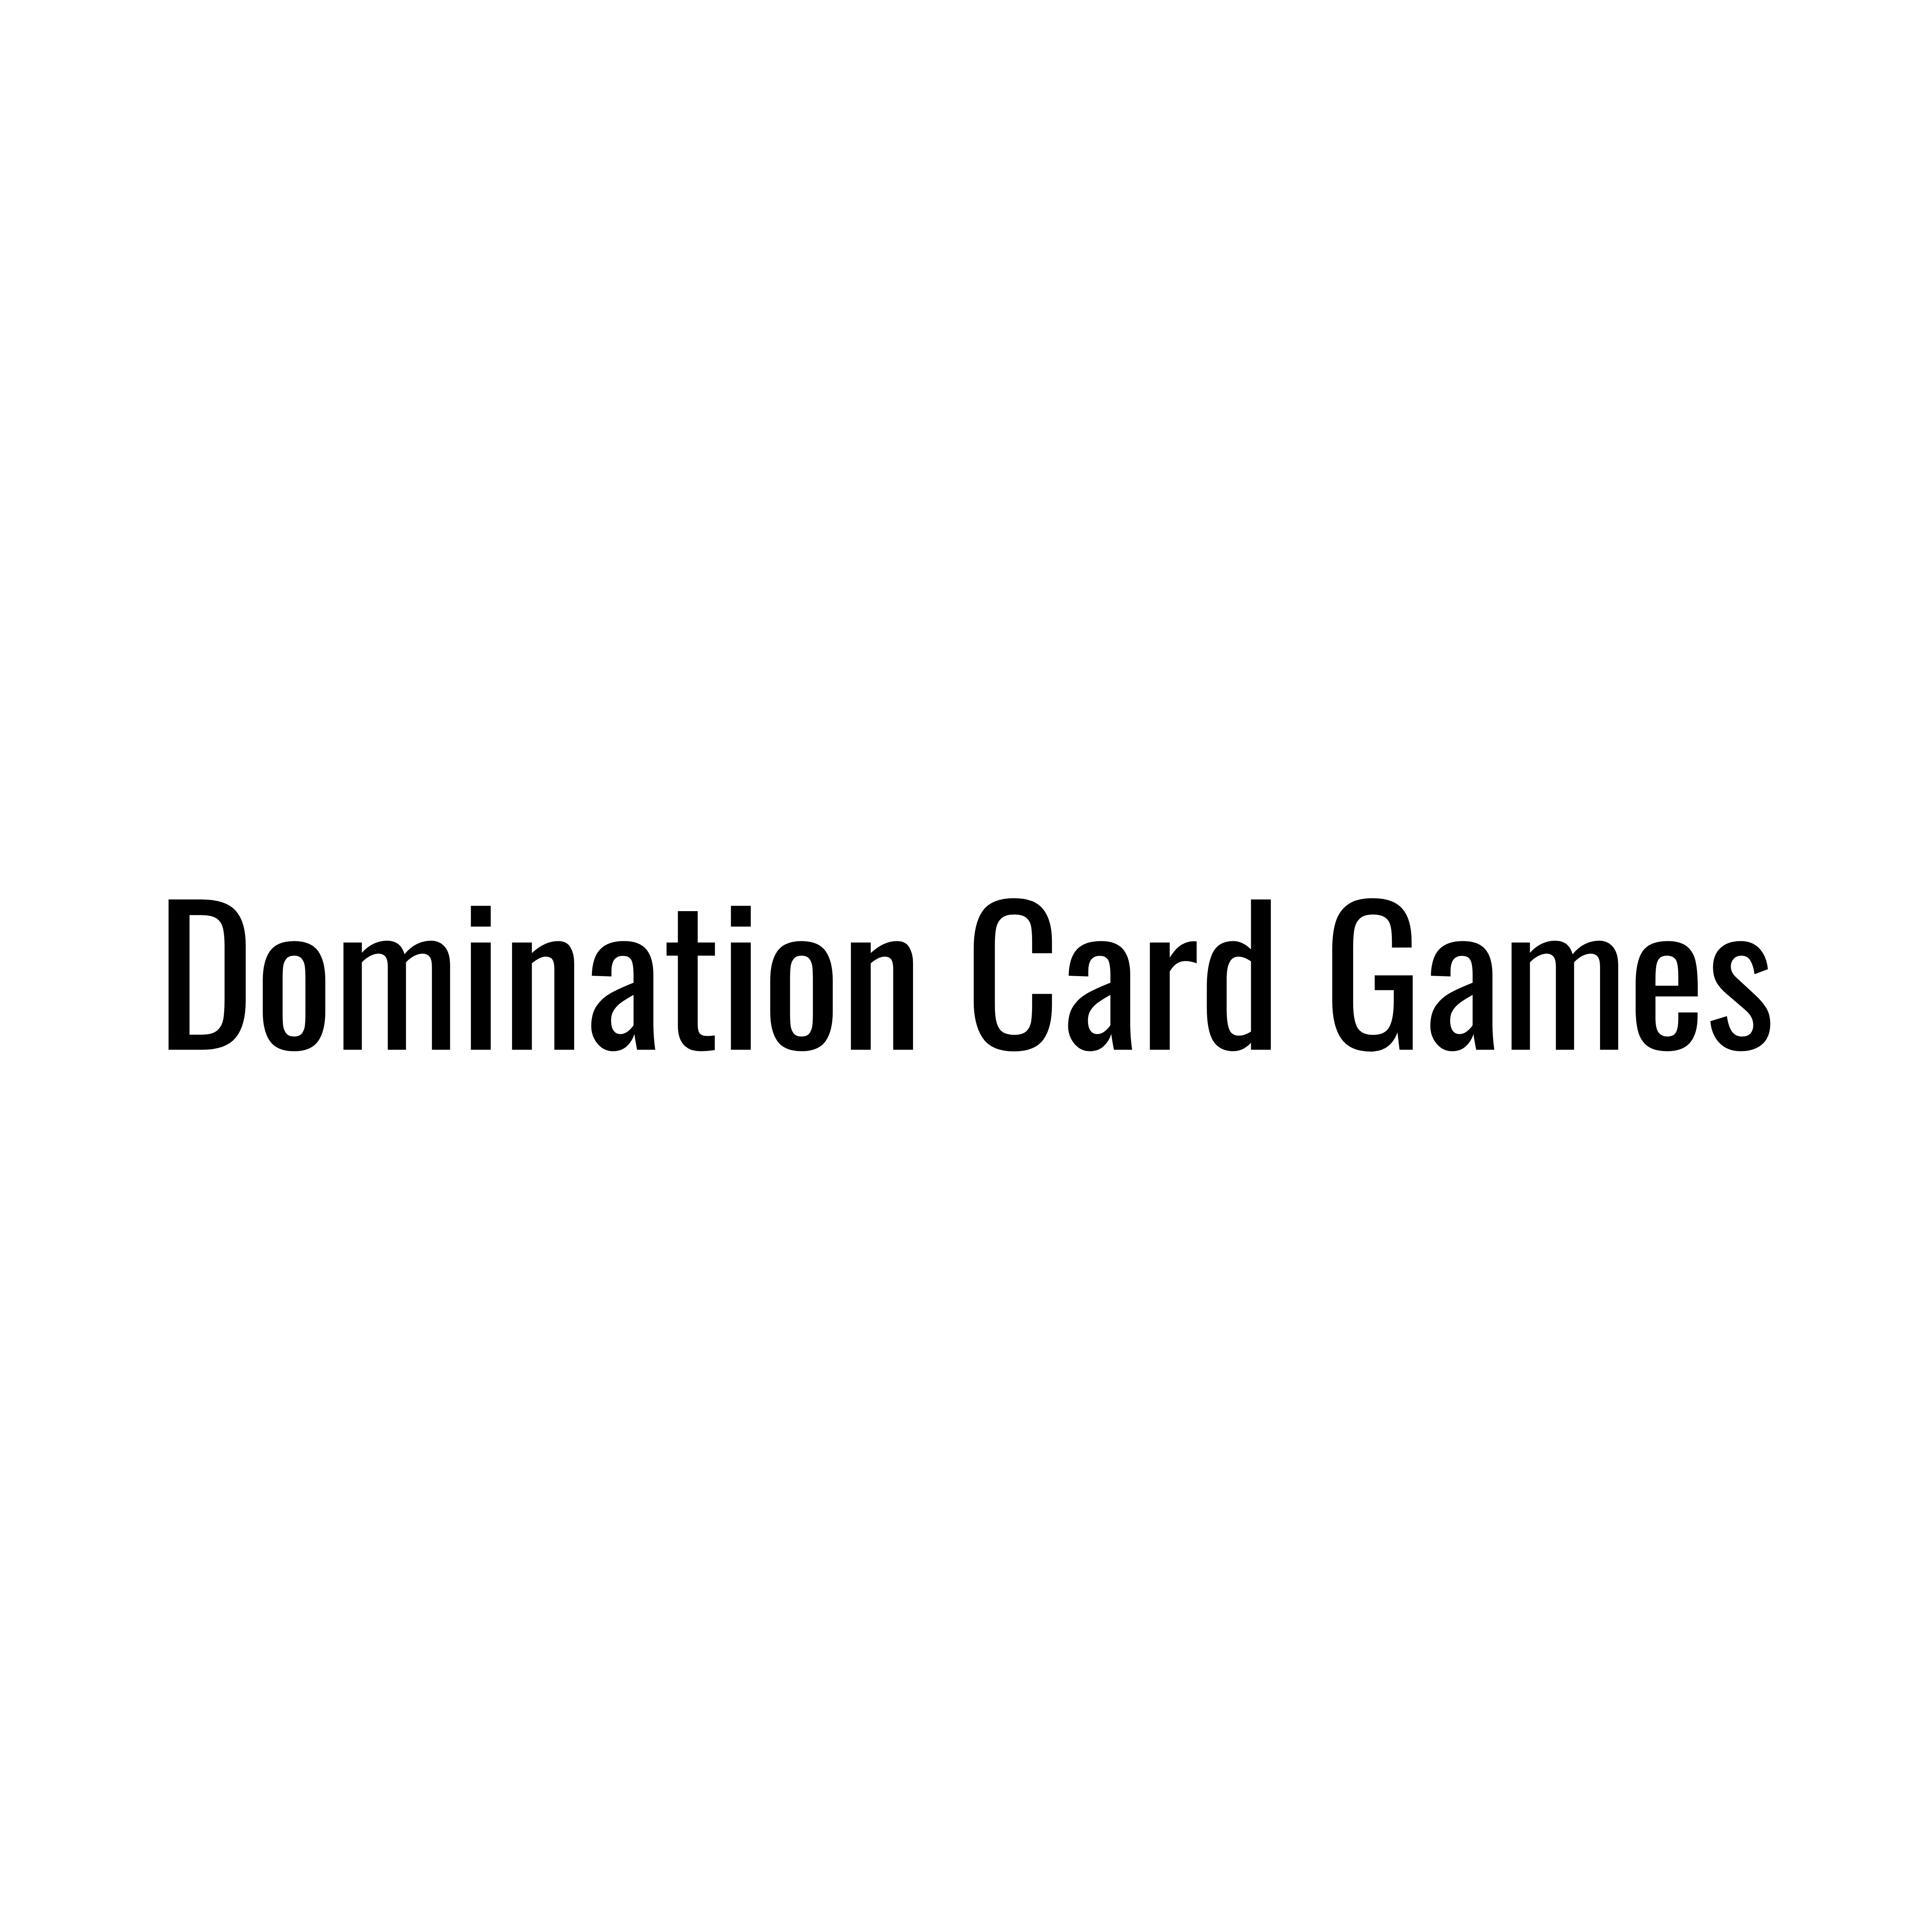 Domination Card Games